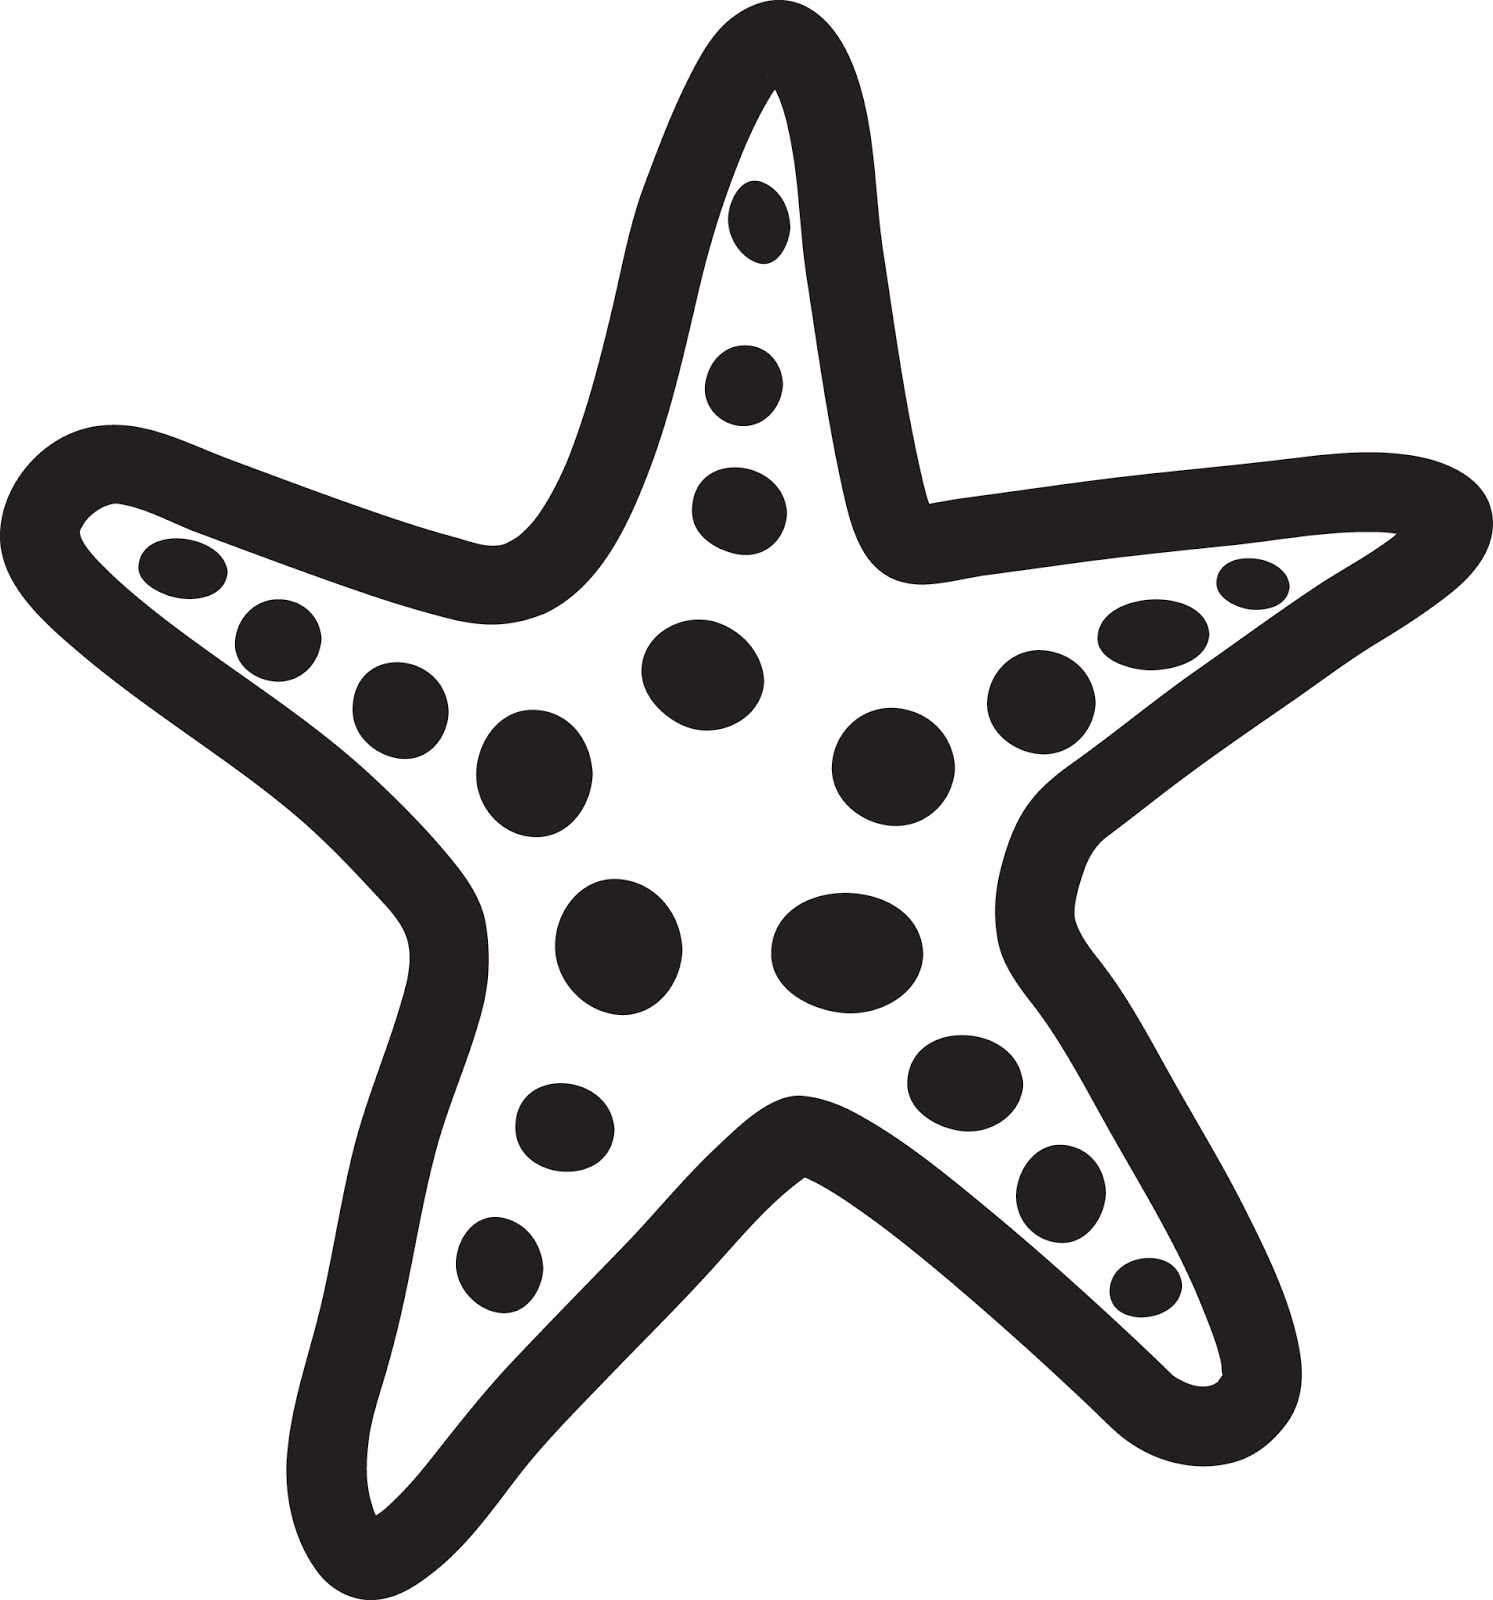 To Starfish Orange Red Clip Clipart Free Clip Art Images Image 0 Cliparting Com